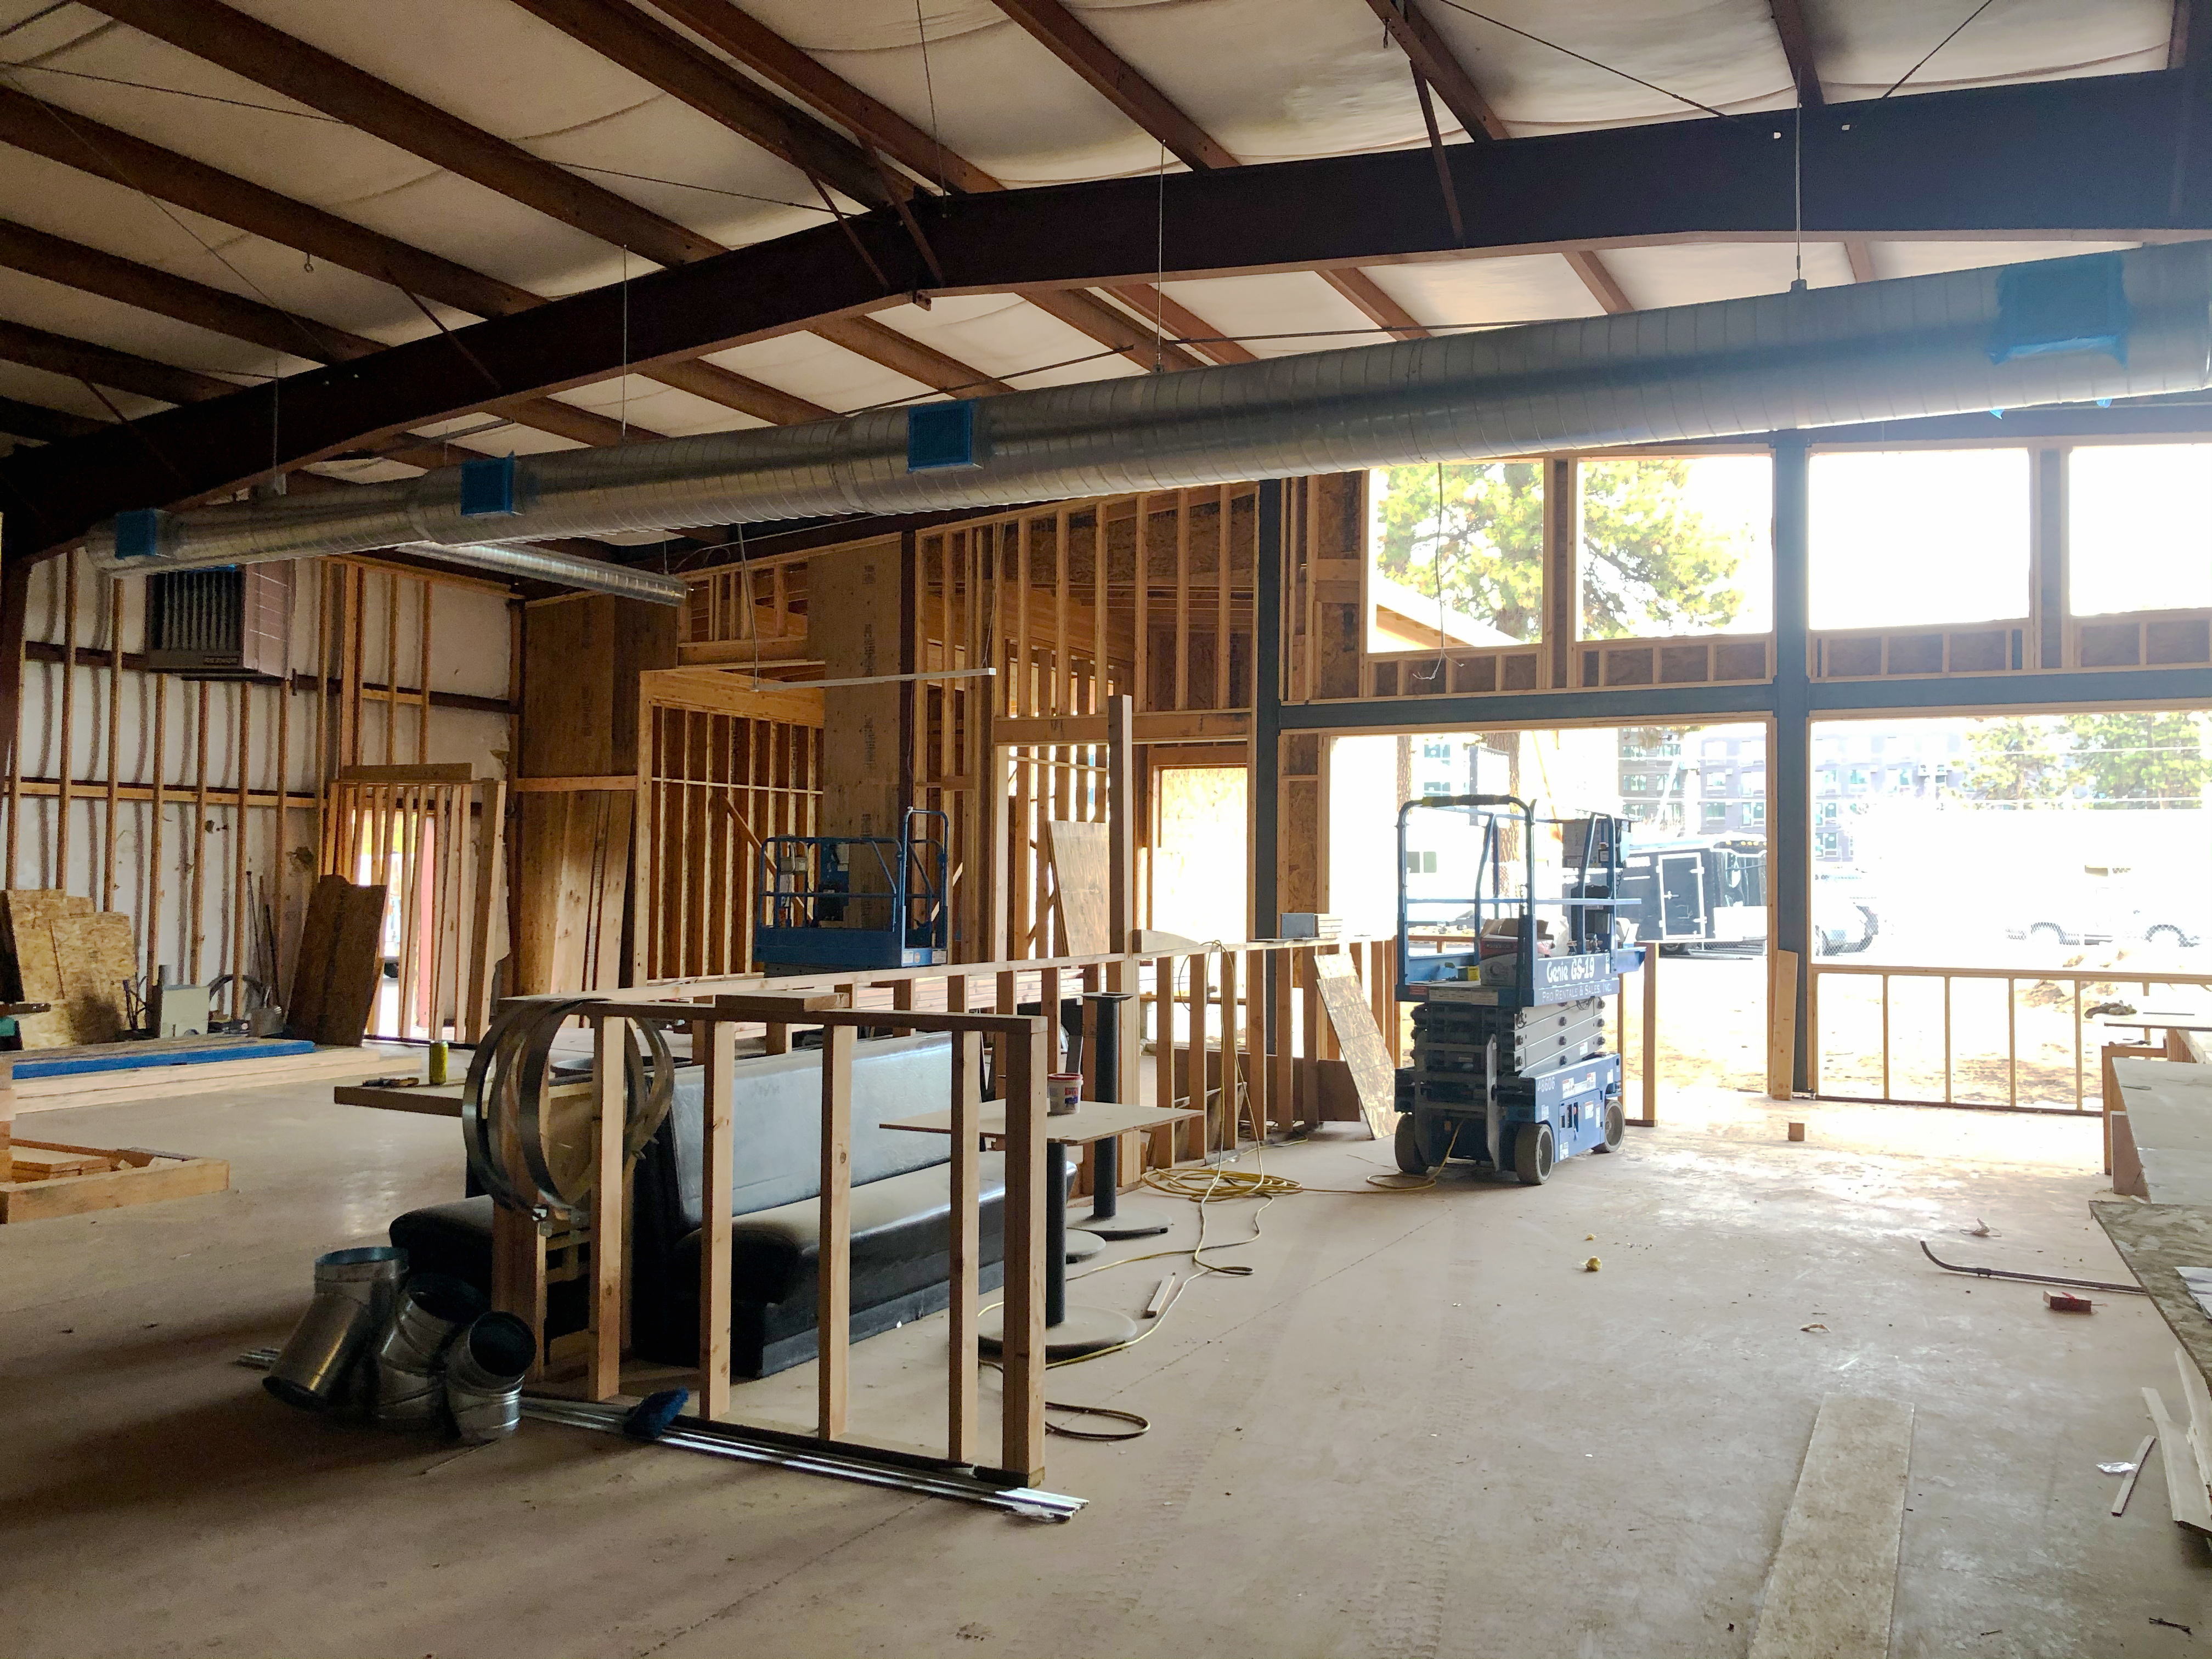 Looking out to the street through the front of the building, still under construction, exposed roof beams and air ducts can be seen along with the wall studs